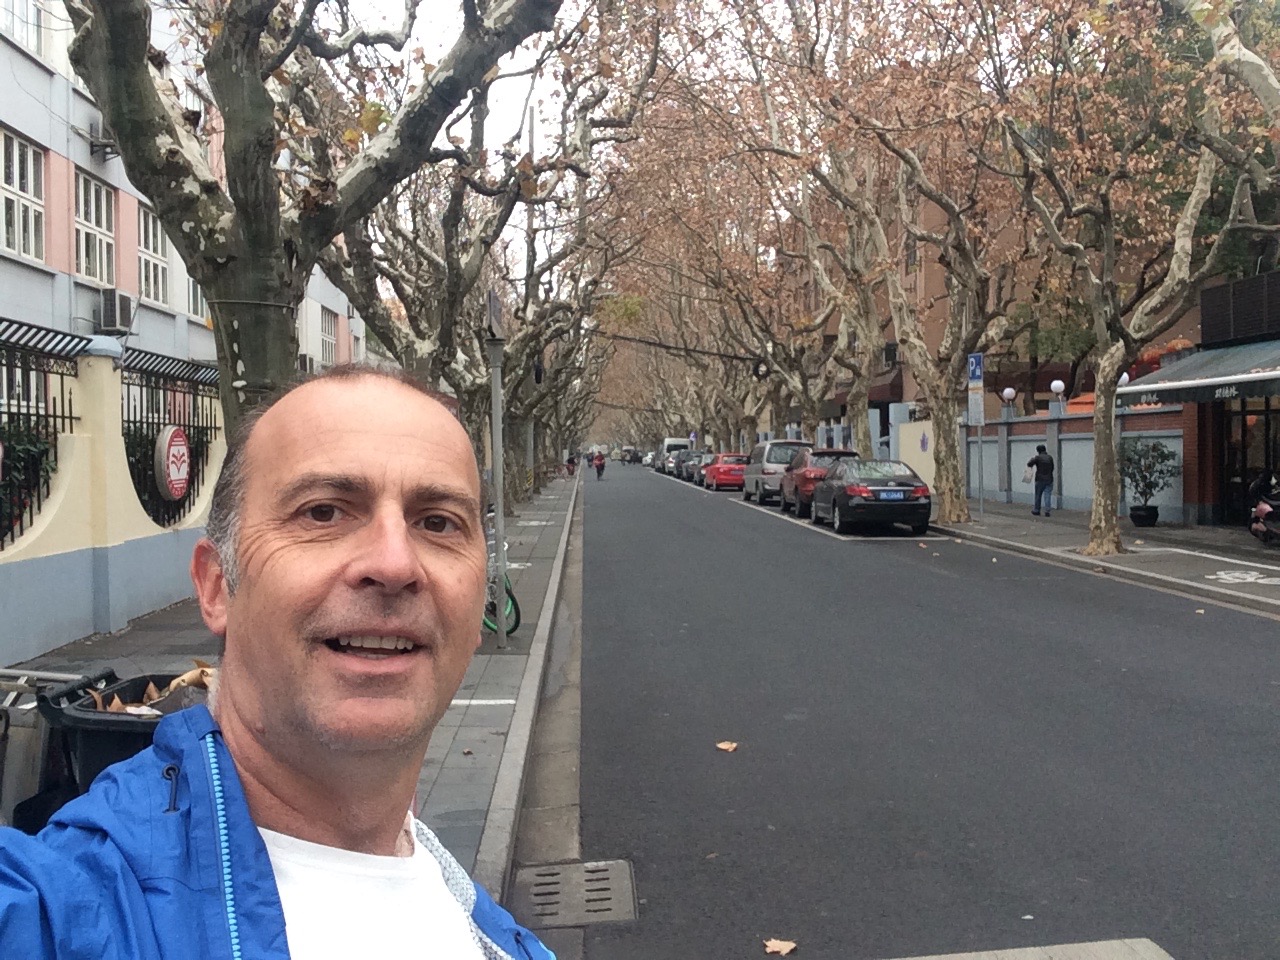 a man taking a selfie on a street with trees and buildings